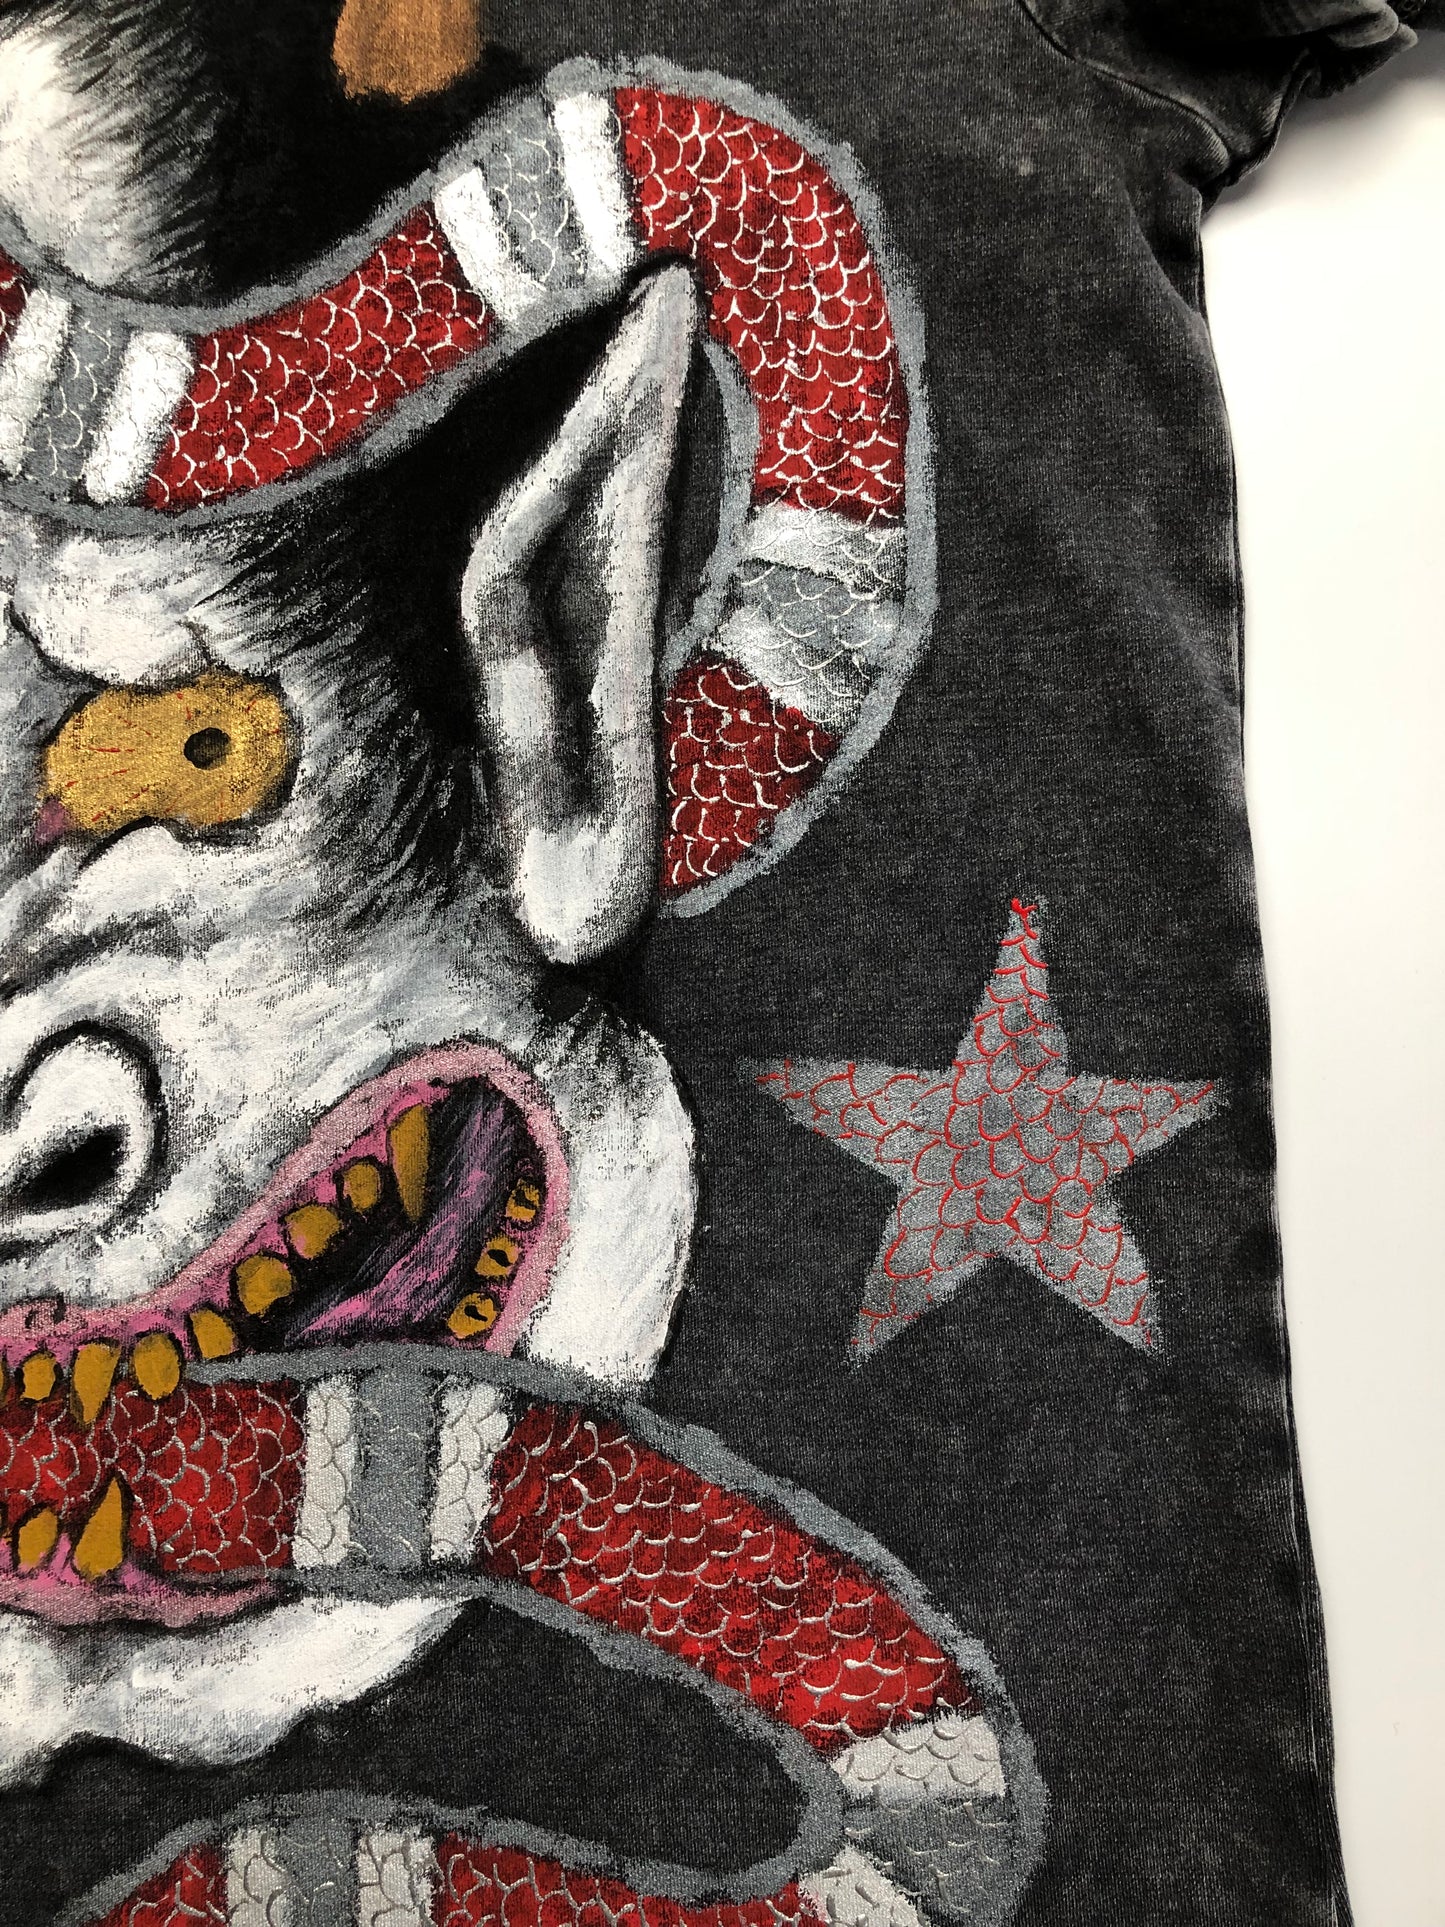 Women's T-shirt Japanese demon Oni with stars and a snake detail